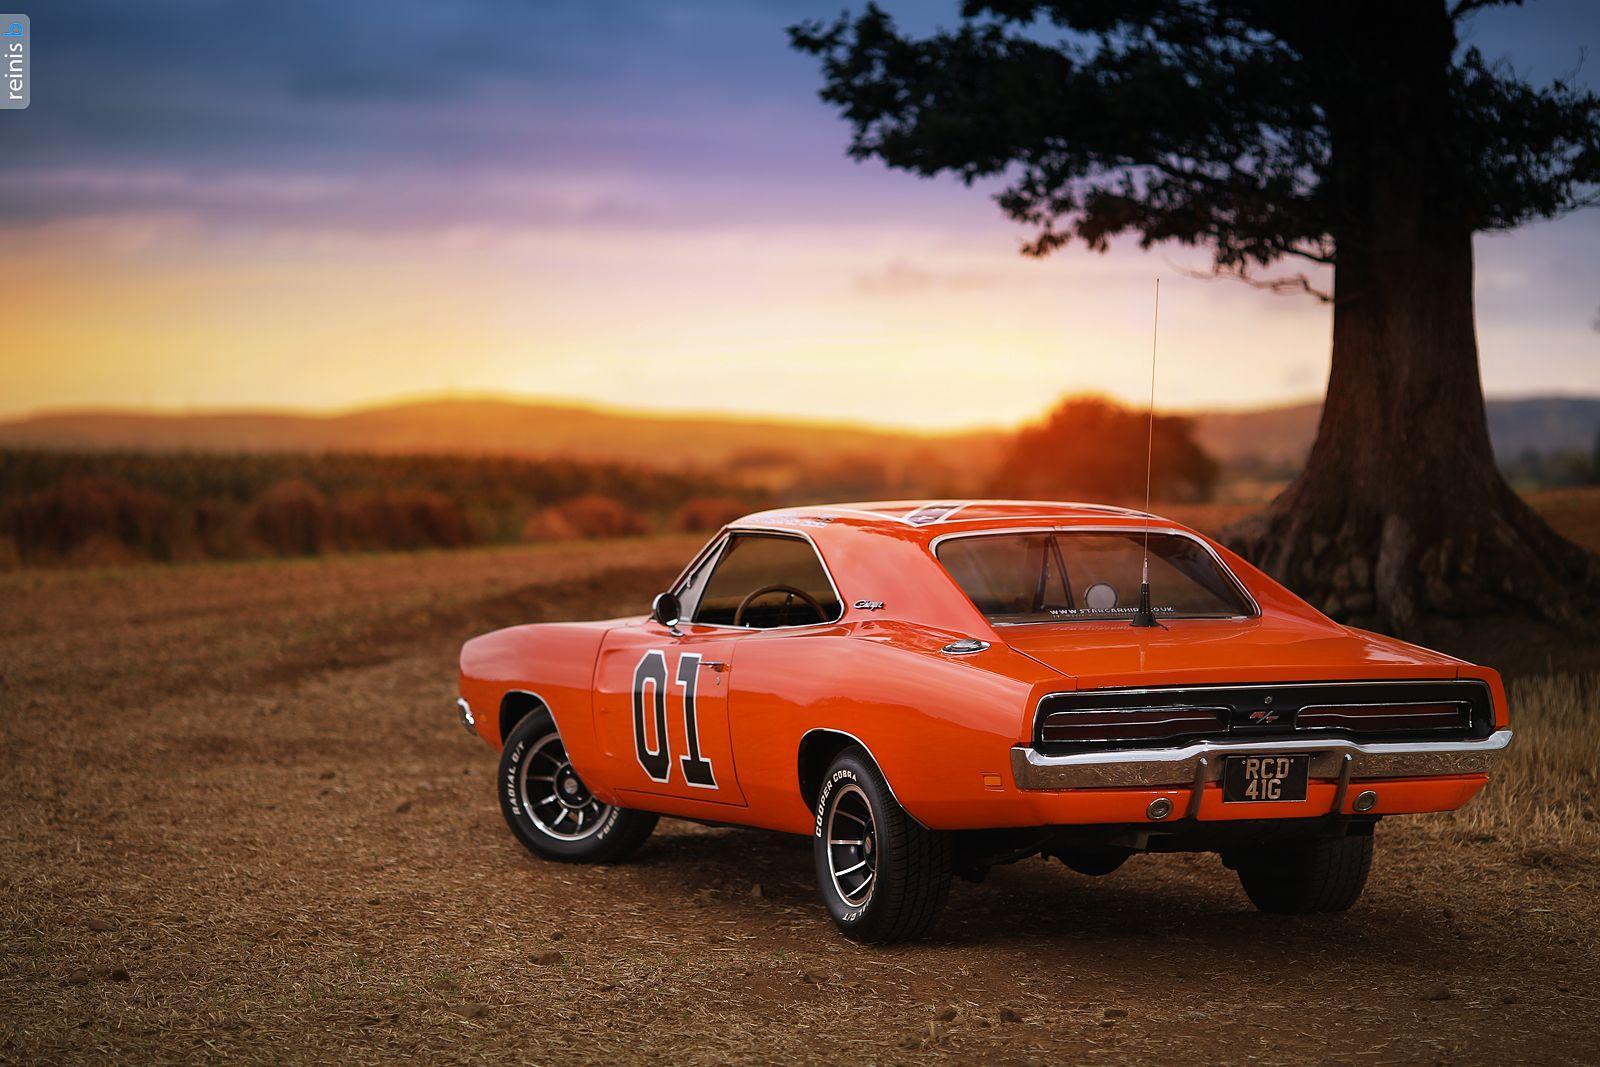 Bw General Lee wallpaper by XxRayst3rXx  Download on ZEDGE  152f